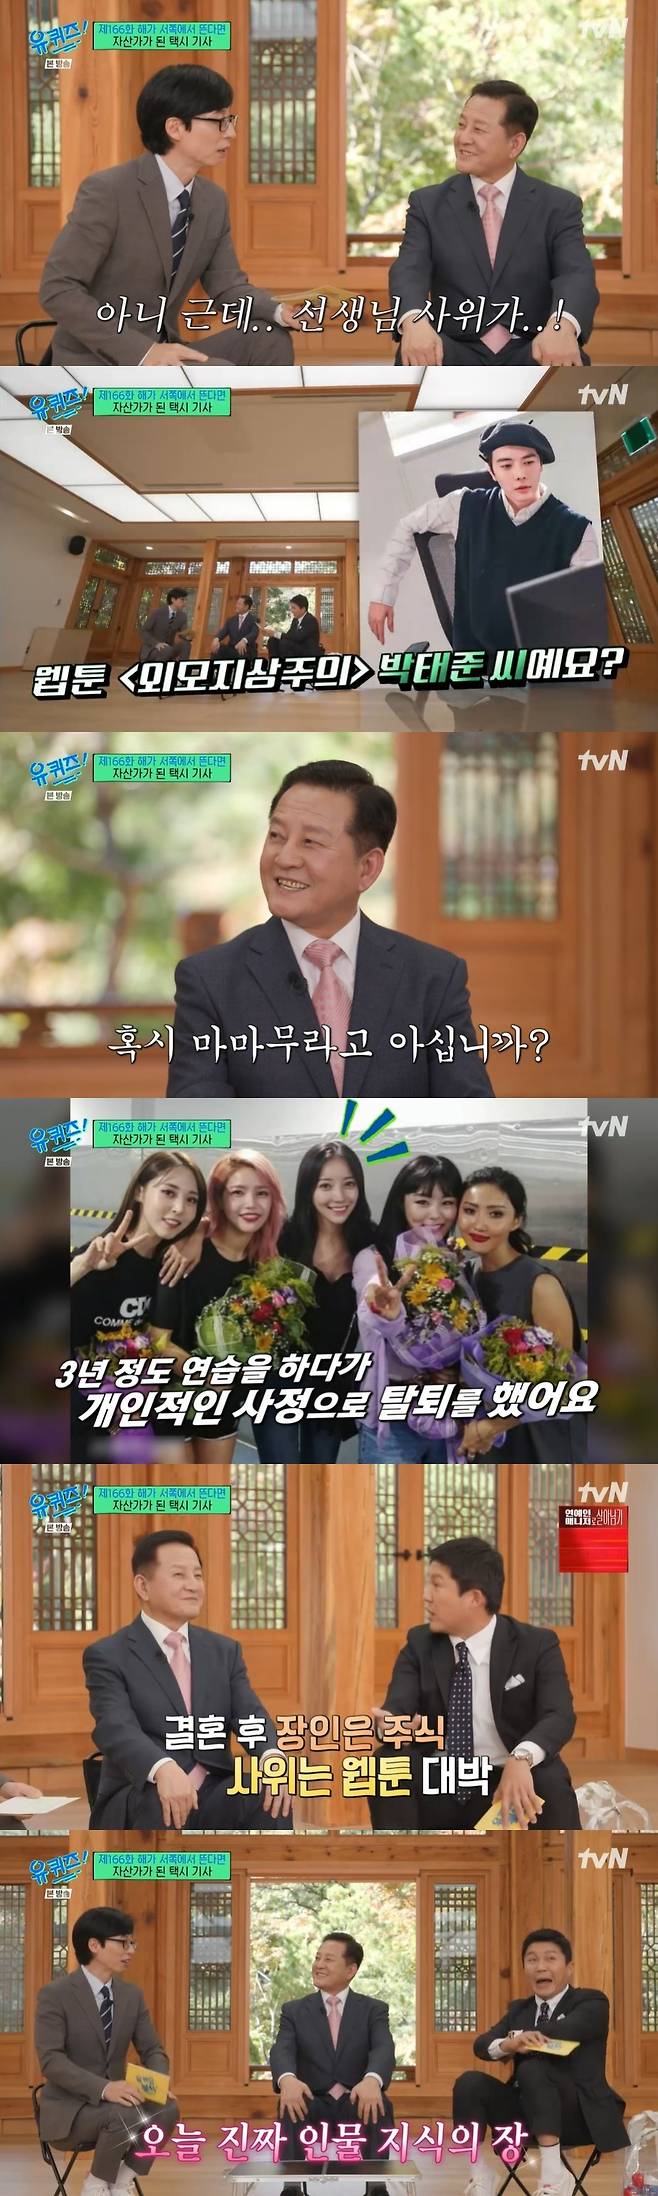 In You Quiz on the Block broadcast on the 26th, Choi Won-ho, who became a billionaire investor by investing in S Electronics Share as a feature of If the sun rises in the west.On this day, Choi Won-ho unveiled a story that challenged taxi drivers, toast Vic-Fezensac, clothes Vic-Fezensac,In addition, Choi Won-ho also mentioned his son-in-law, who revealed that his son-in-law was Bak Tae Jun, who drew the webcomic Appearance Superstition.Yoo Jae-Suk was surprised at the unexpected relationship, saying, How are you two?Jo Se-ho asked, How did your son-in-law meet your daughter? Choi Won-ho said, Do you know MAMAMOO? My daughter practiced for about three years and withdrew due to personal reasons.Yoo Jae-suk said, Well, did you (daughter) prepare for your debut as a girl group? He looked at Choi Won-ho, saying, You have a lot of good things overall.Jo Se-ho added, I met my father in the position of my son-in-law, and he was a big hit with Share, and I met my son-in-law in my fathers position.